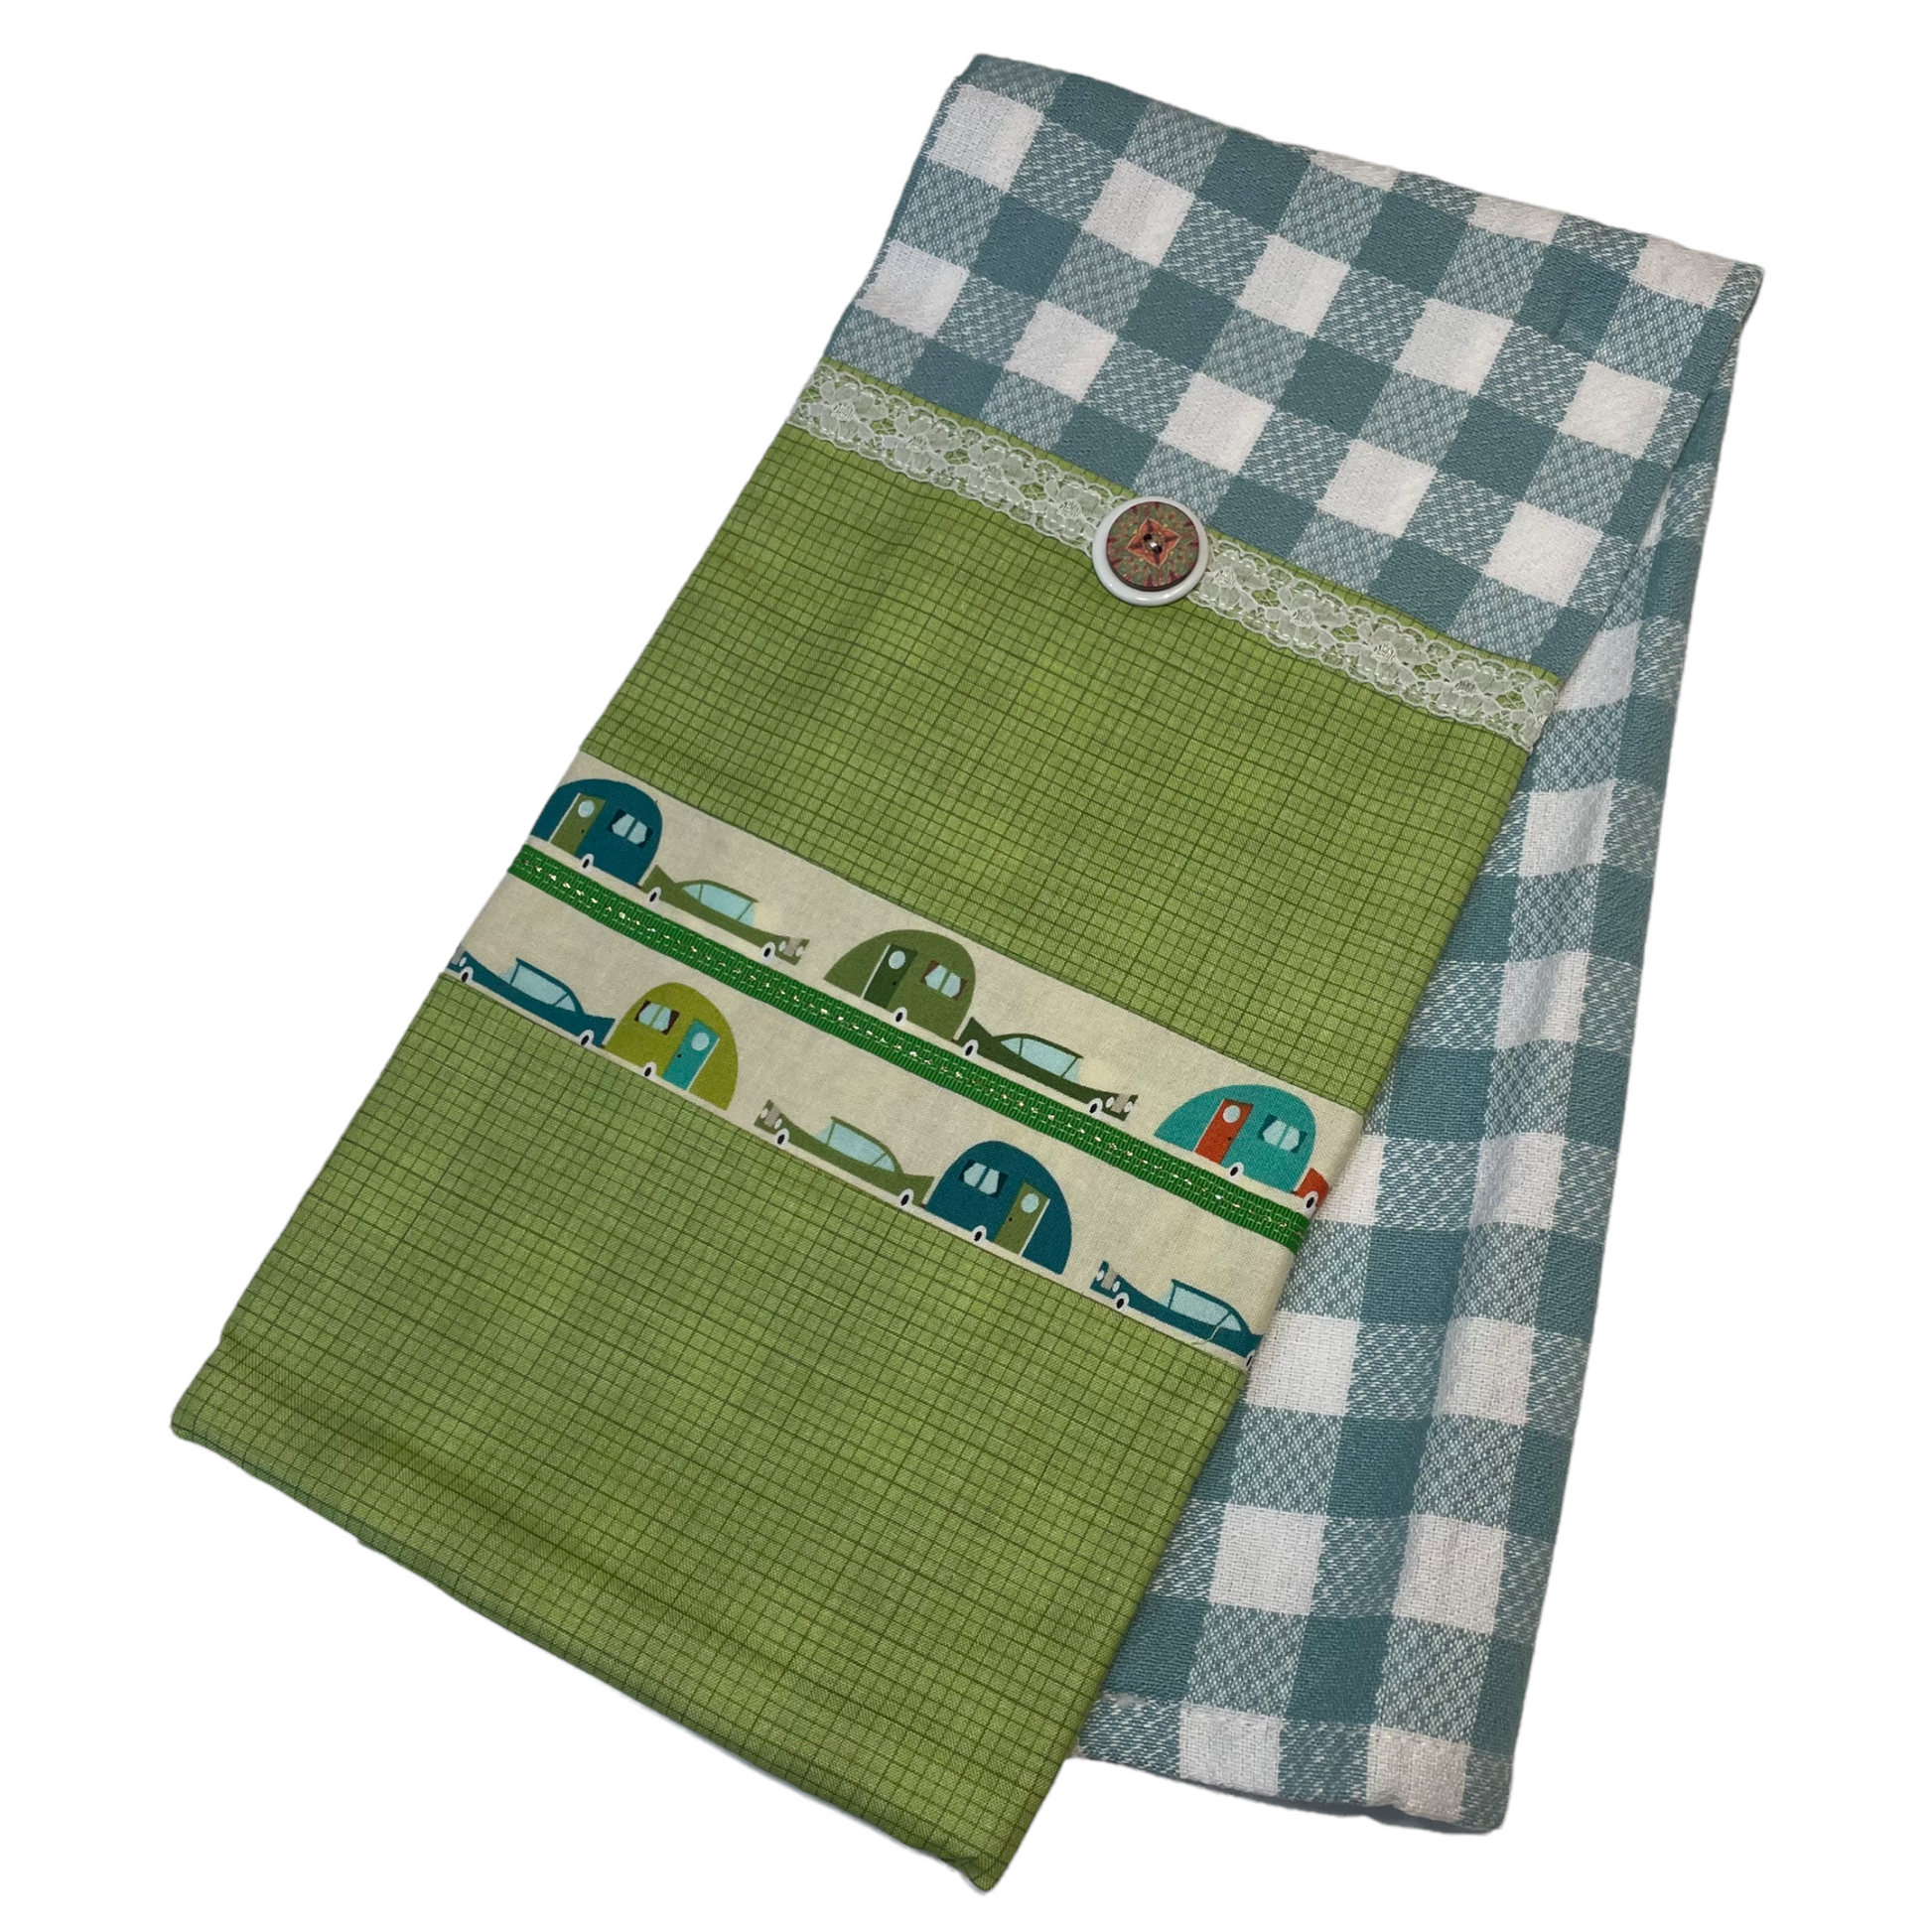 White and Teal Checked Kitchen Dish Towel with cute retro boler trailers, white and green trim and button. A perfect gift for the glamper in your life. Find this and coordinating products on the website. Or follow along on the Home Stitchery Decor YouTube channel, featuring sewing and Cricut tutorials.